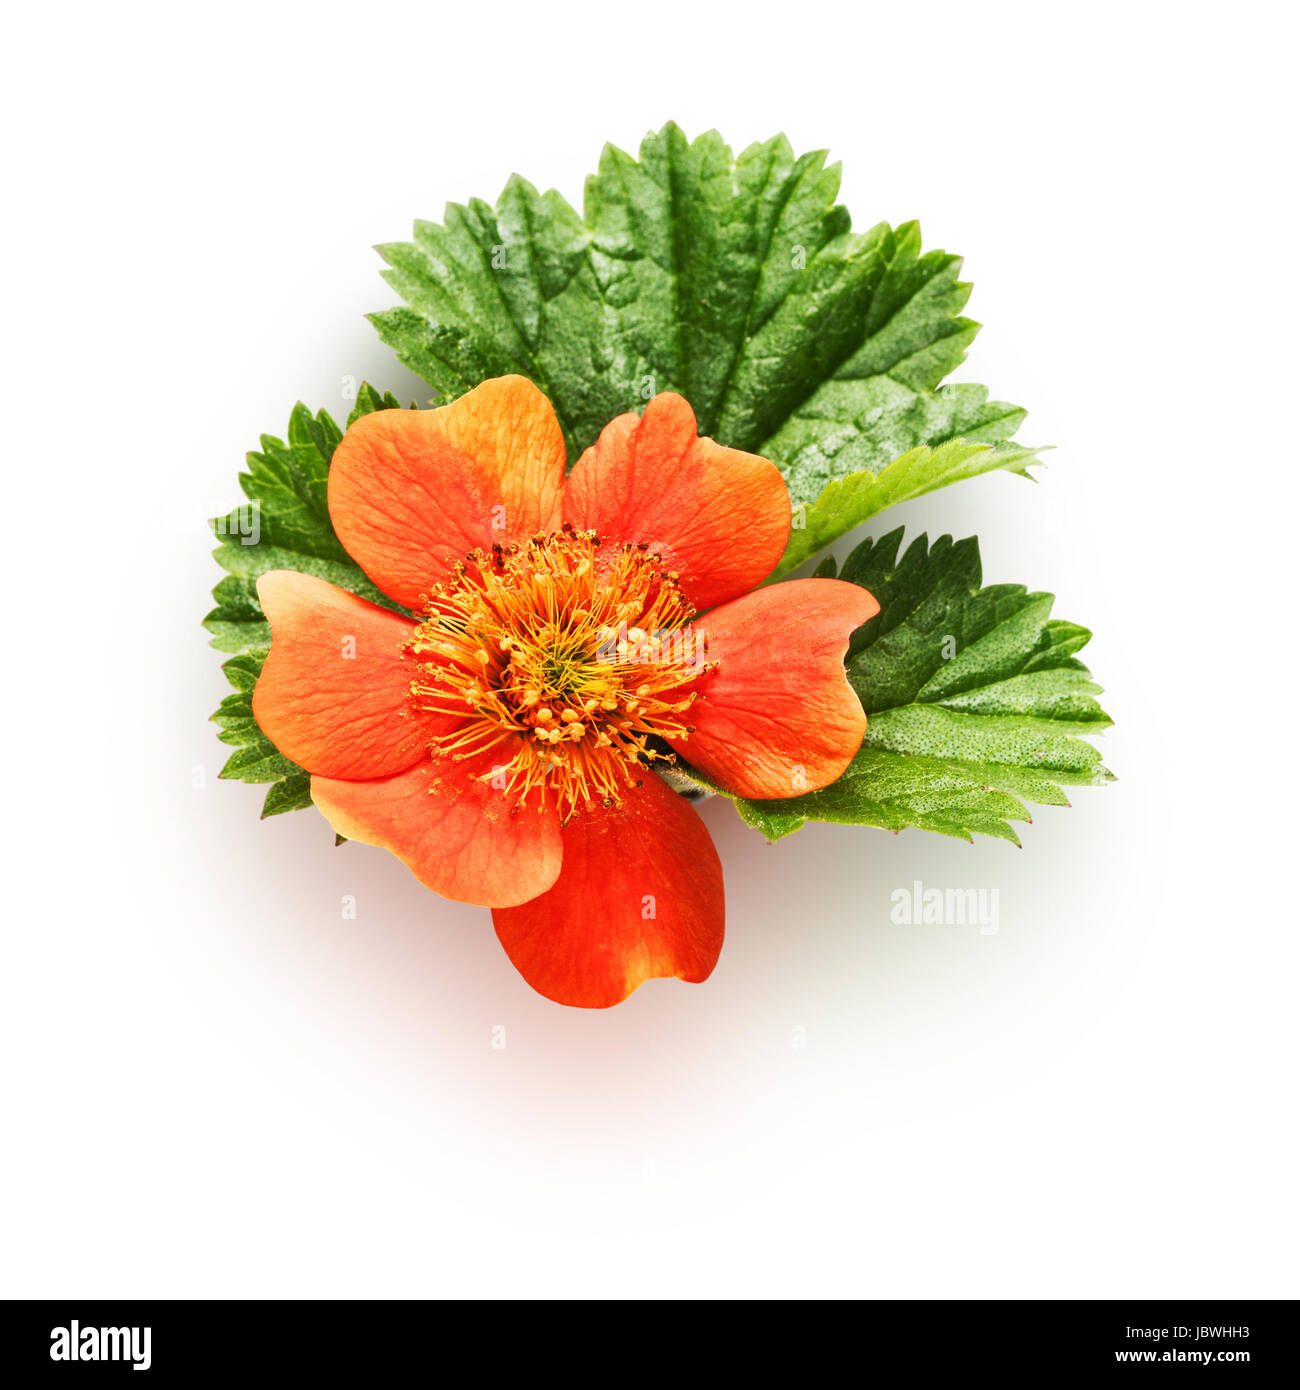 Orange potentilla rose flower with leaf isolated on white background clipping path included Stock Photo